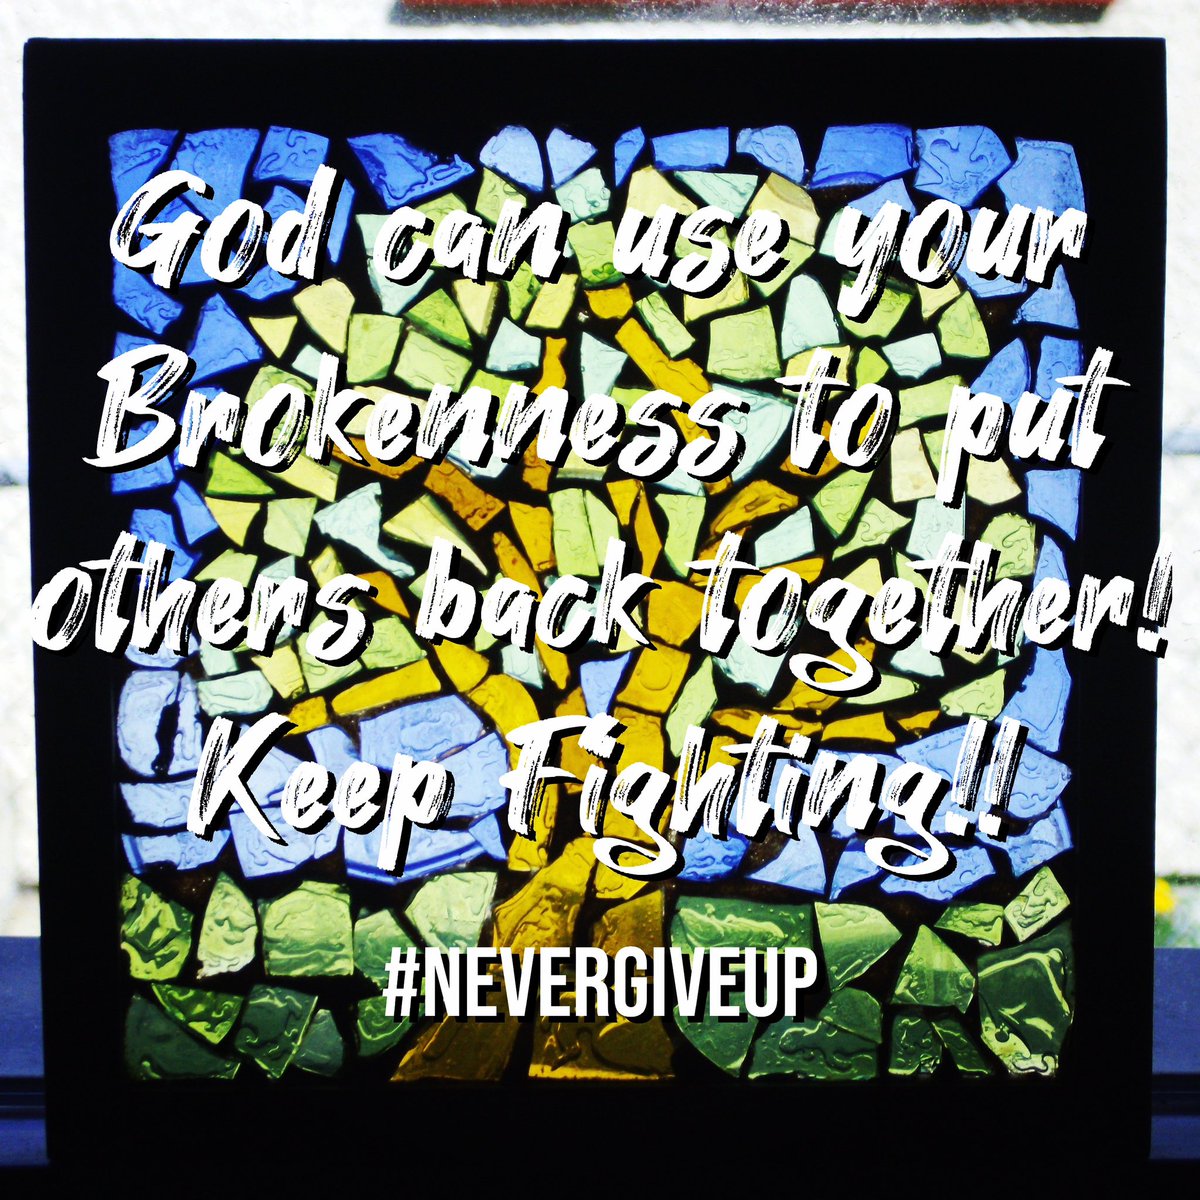 God can use your Brokenness to put others back together! Keep Fighting!! #nevergiveup #nevergivein #dontgiveup #keepfighting #trustgod #walkbyfaithnotbysight